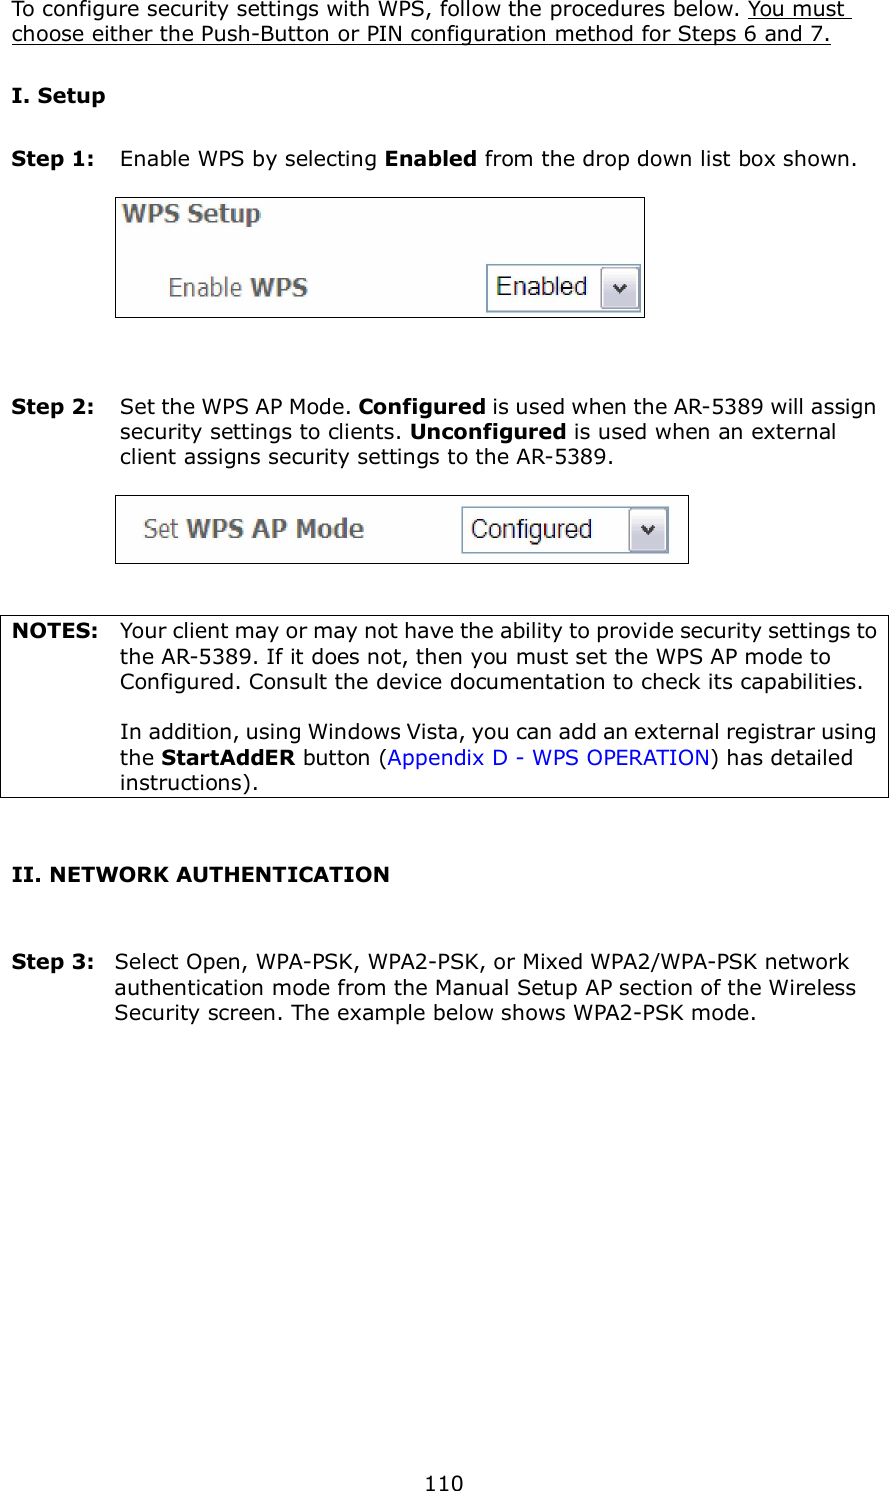  110 To configure security settings with WPS, follow the procedures below. You must choose either the Push-Button or PIN configuration method for Steps 6 and 7. I. Setup Step 1:  Enable WPS by selecting Enabled from the drop down list box shown.       Step 2:  Set the WPS AP Mode. Configured is used when the AR-5389 will assign security settings to clients. Unconfigured is used when an external client assigns security settings to the AR-5389.      NOTES:  Your client may or may not have the ability to provide security settings to the AR-5389. If it does not, then you must set the WPS AP mode to Configured. Consult the device documentation to check its capabilities.    In addition, using Windows Vista, you can add an external registrar using the StartAddER button (Appendix D - WPS OPERATION) has detailed instructions).  II. NETWORK AUTHENTICATION  Step 3:  Select Open, WPA-PSK, WPA2-PSK, or Mixed WPA2/WPA-PSK network authentication mode from the Manual Setup AP section of the Wireless Security screen. The example below shows WPA2-PSK mode.  